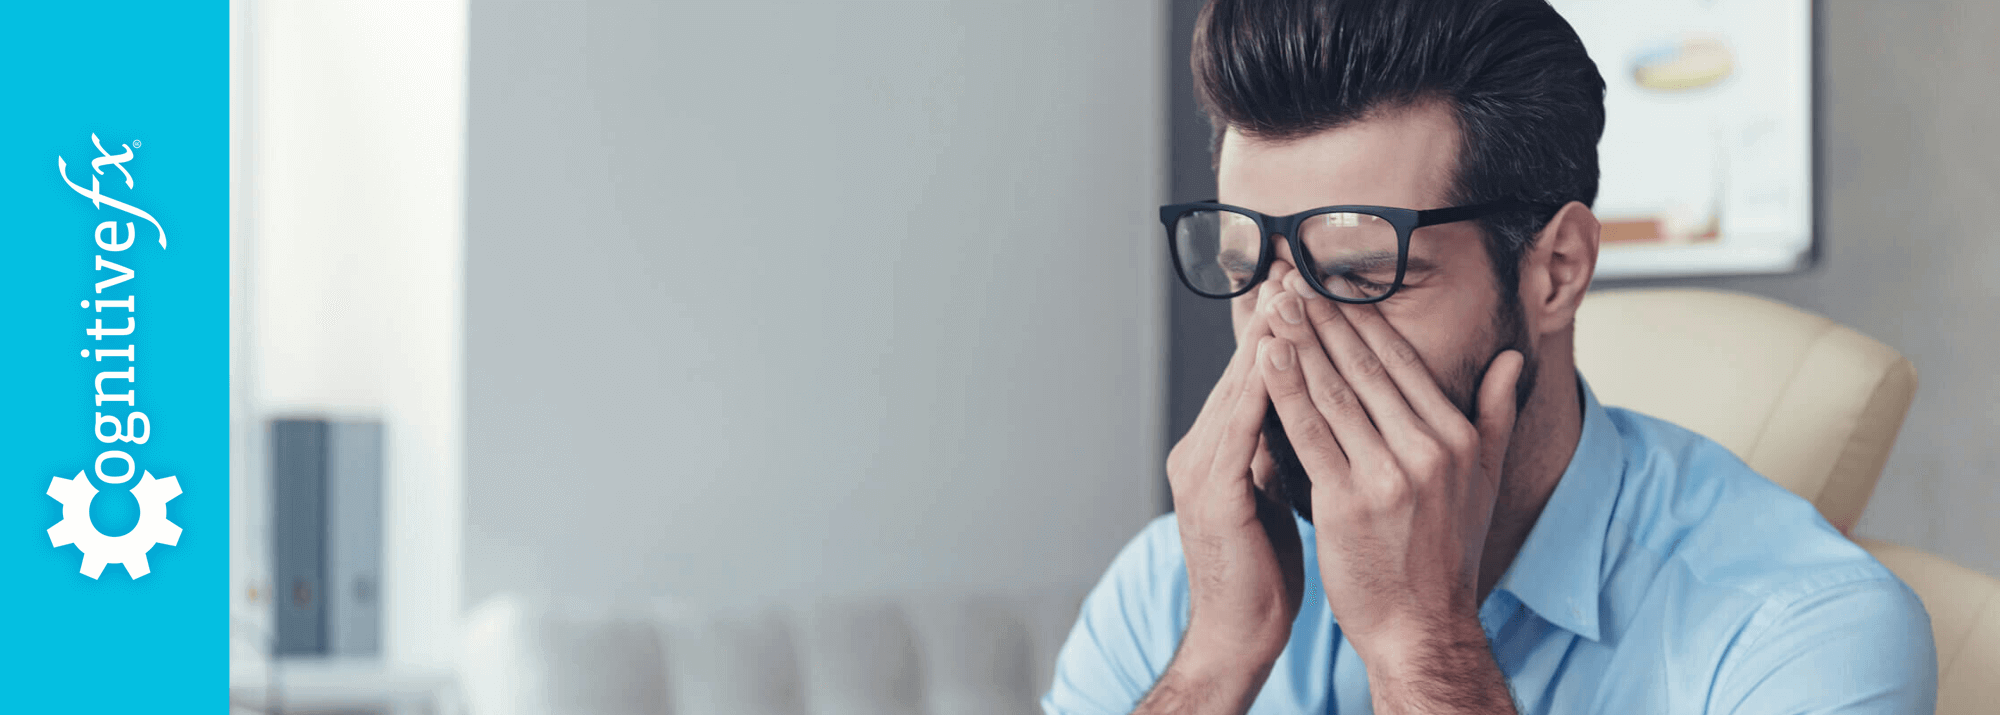 Vision Problems After COVID: Causes and Treatment